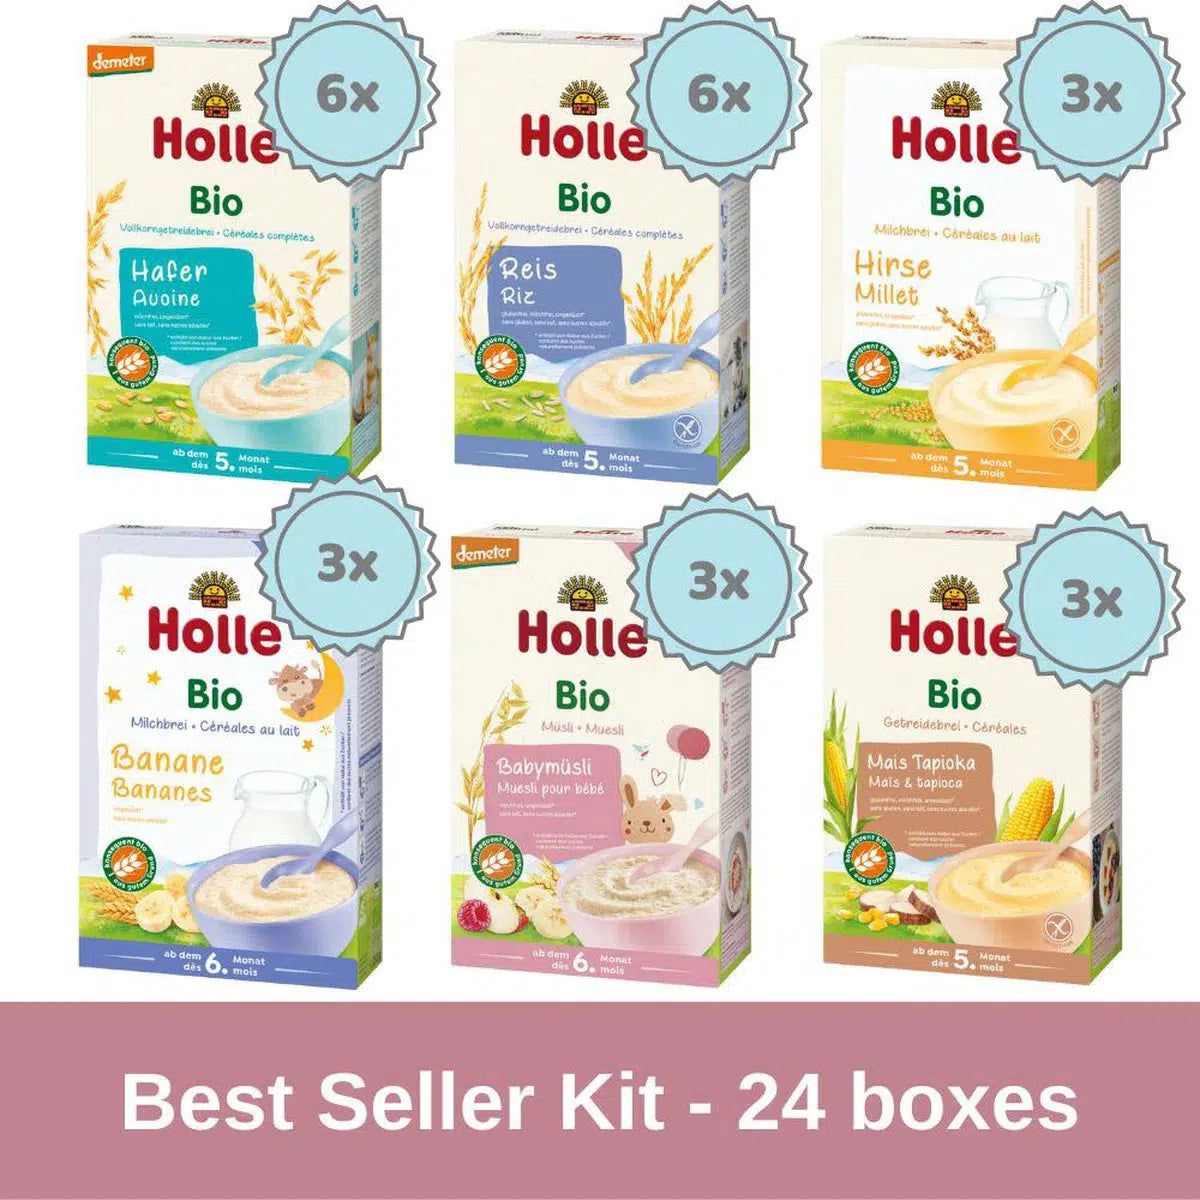 Best Seller Cereals Kit – From 5 months - 24 Boxes